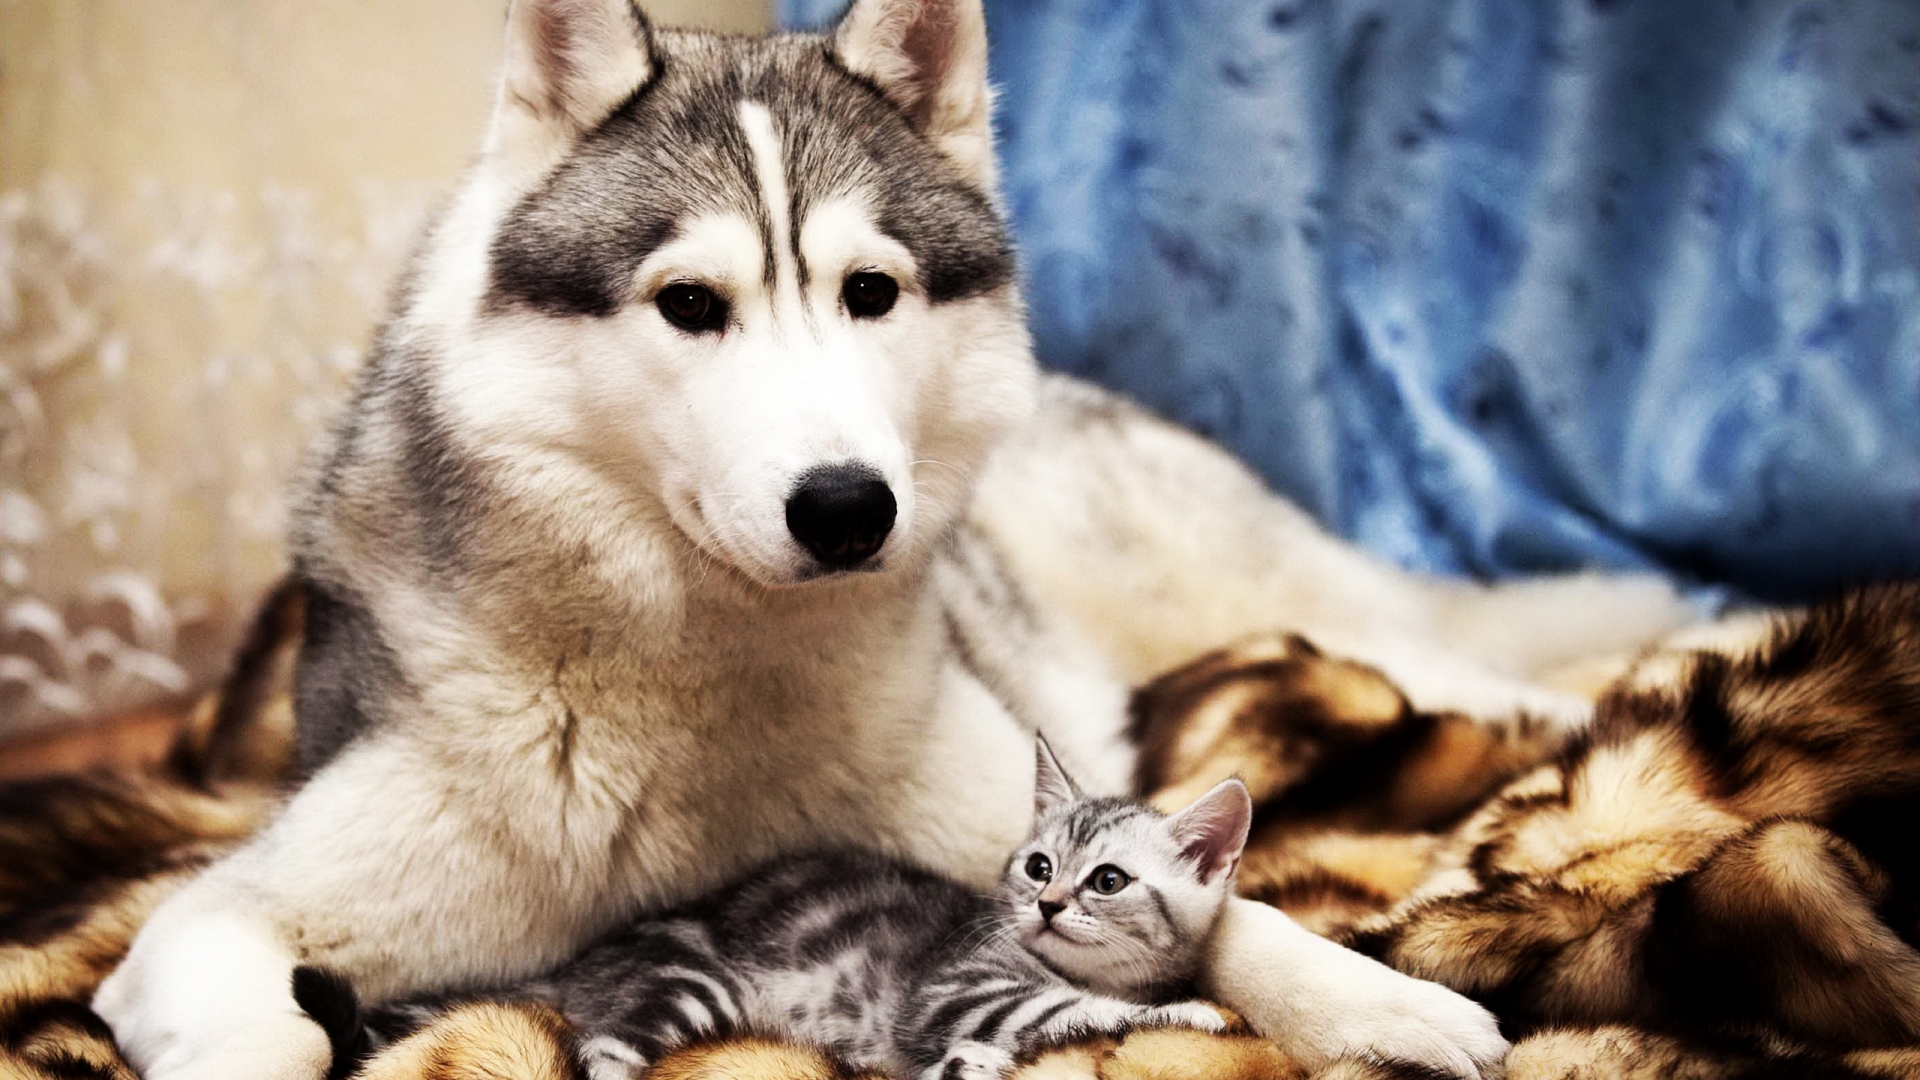 Dog and Cat Friends for 1920 x 1080 HDTV 1080p resolution